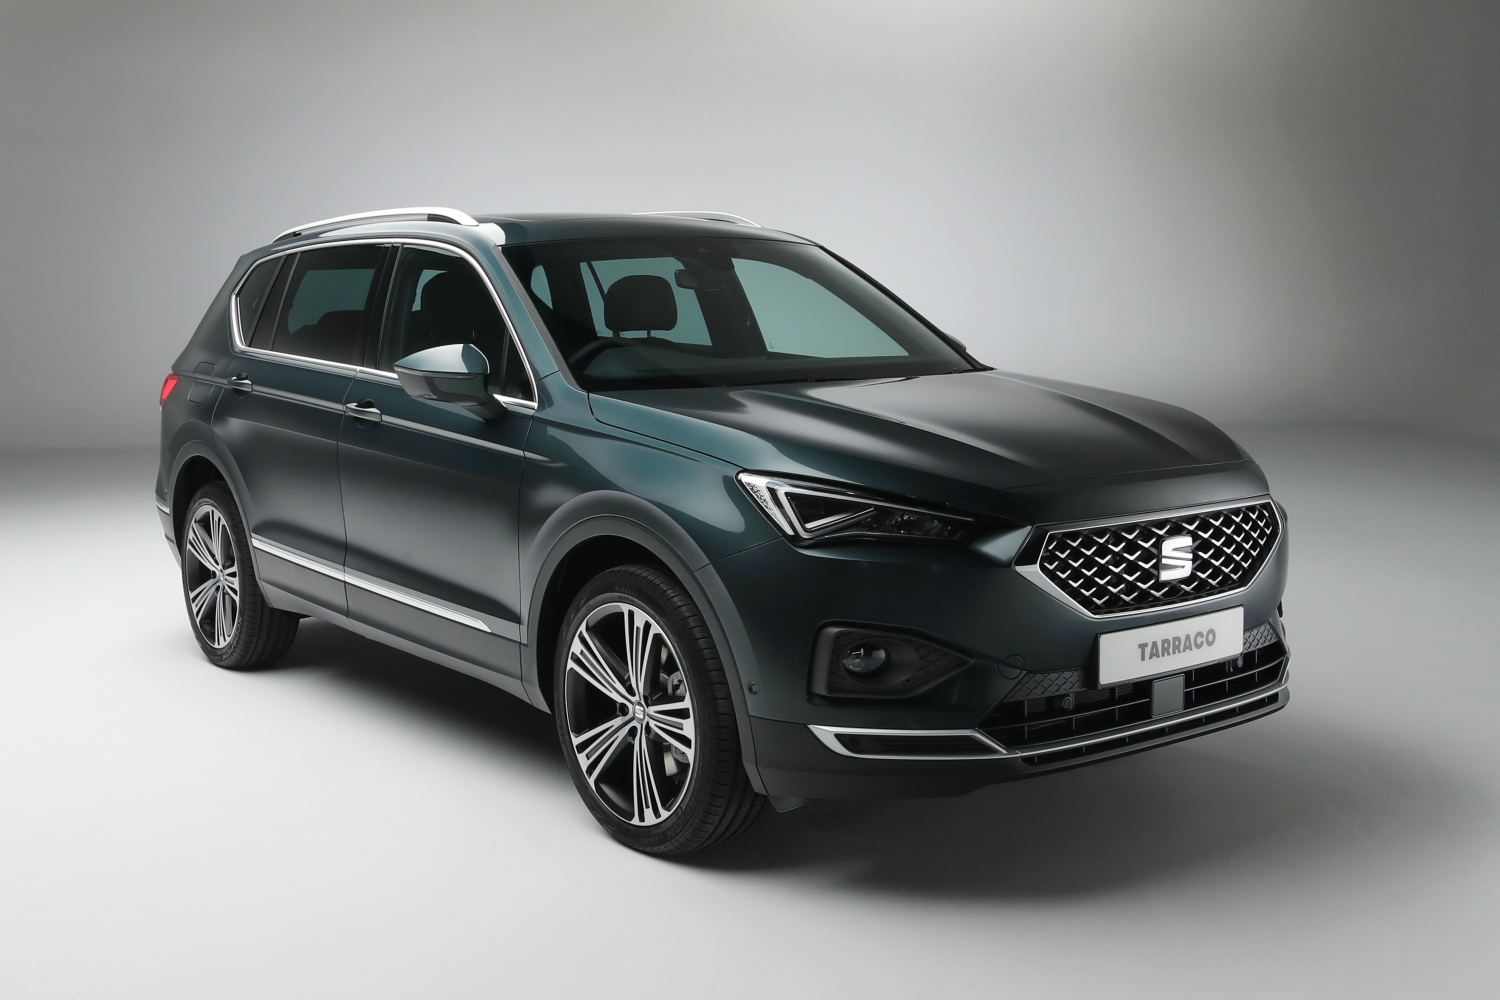 The Tarraco is available with a range of petrol and diesel engines